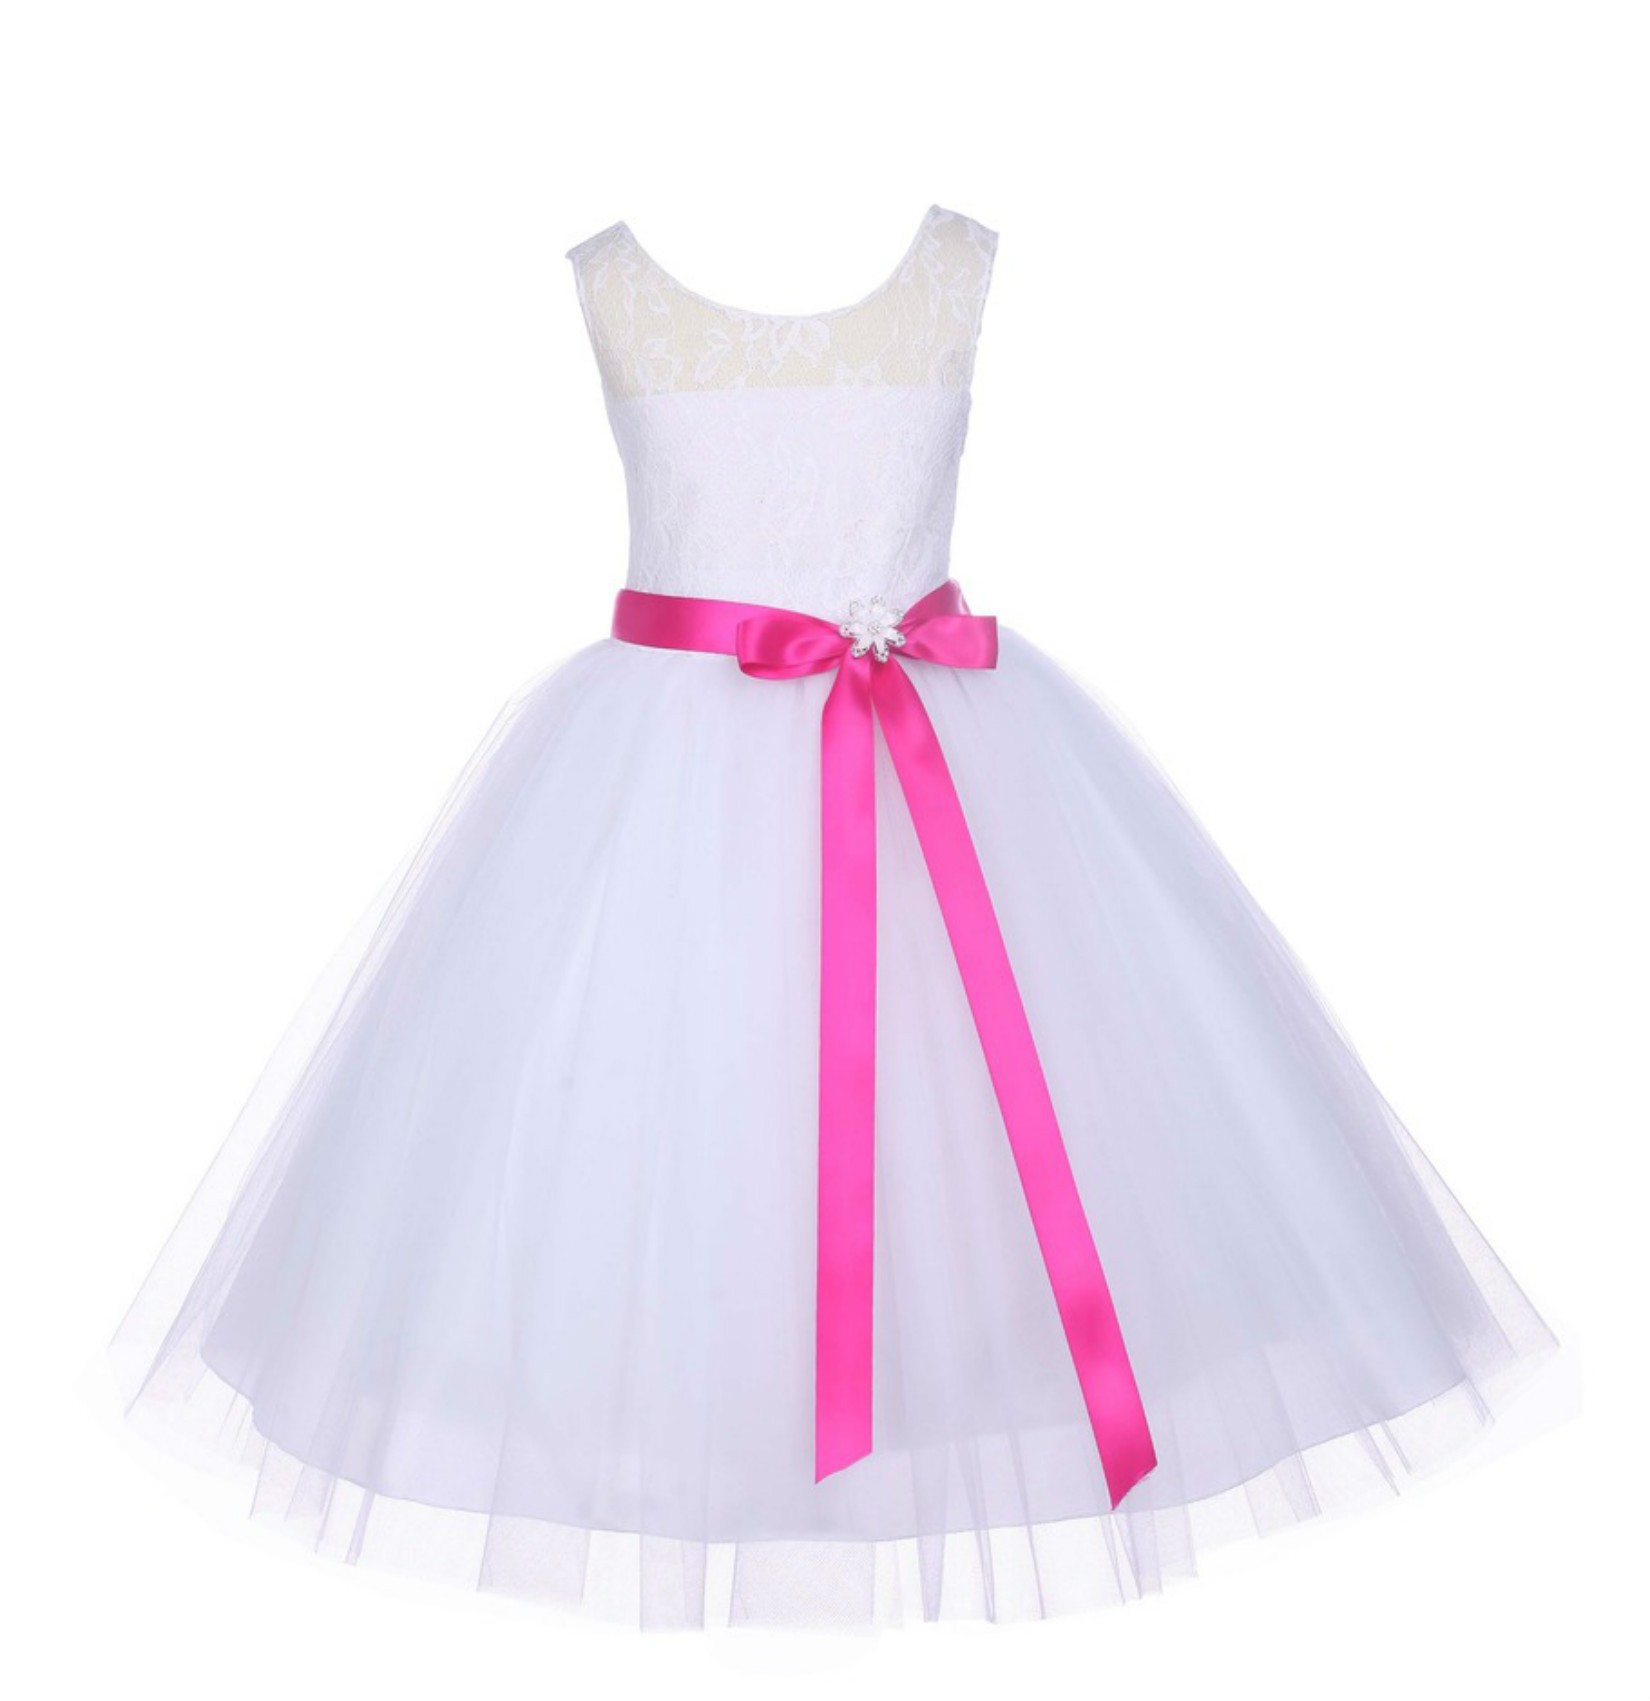 White Floral Lace Bodice Tulle Fuchsia Ribbon Flower Girl Dress 153R